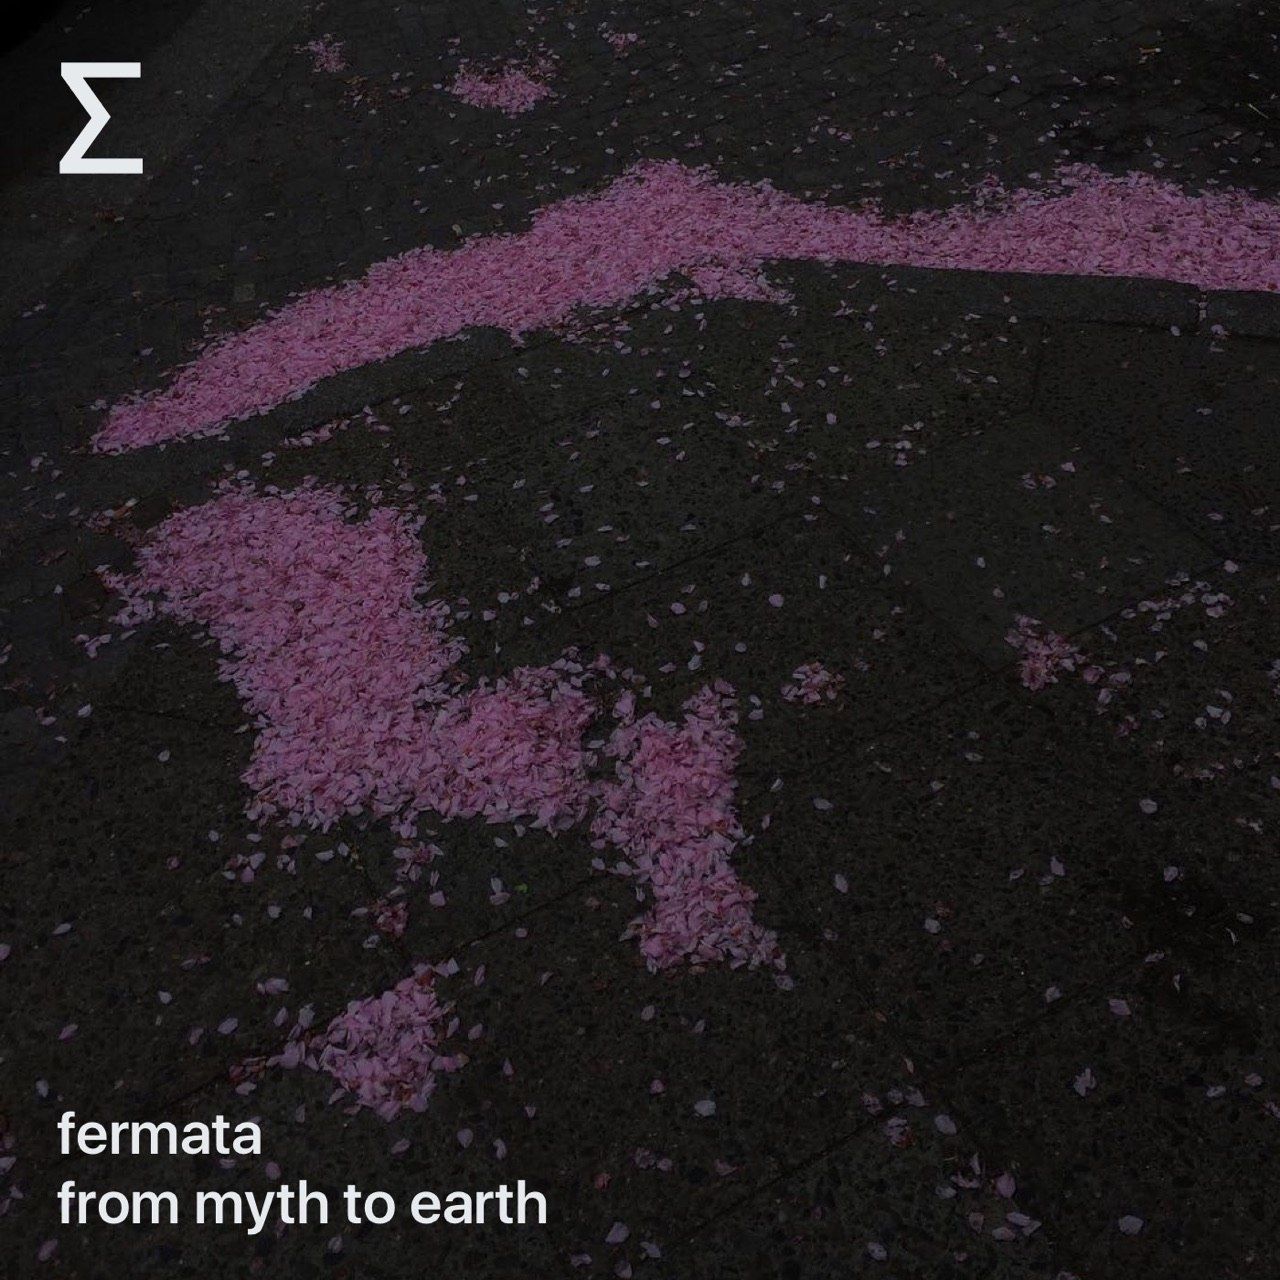 fermata – from myth to earth